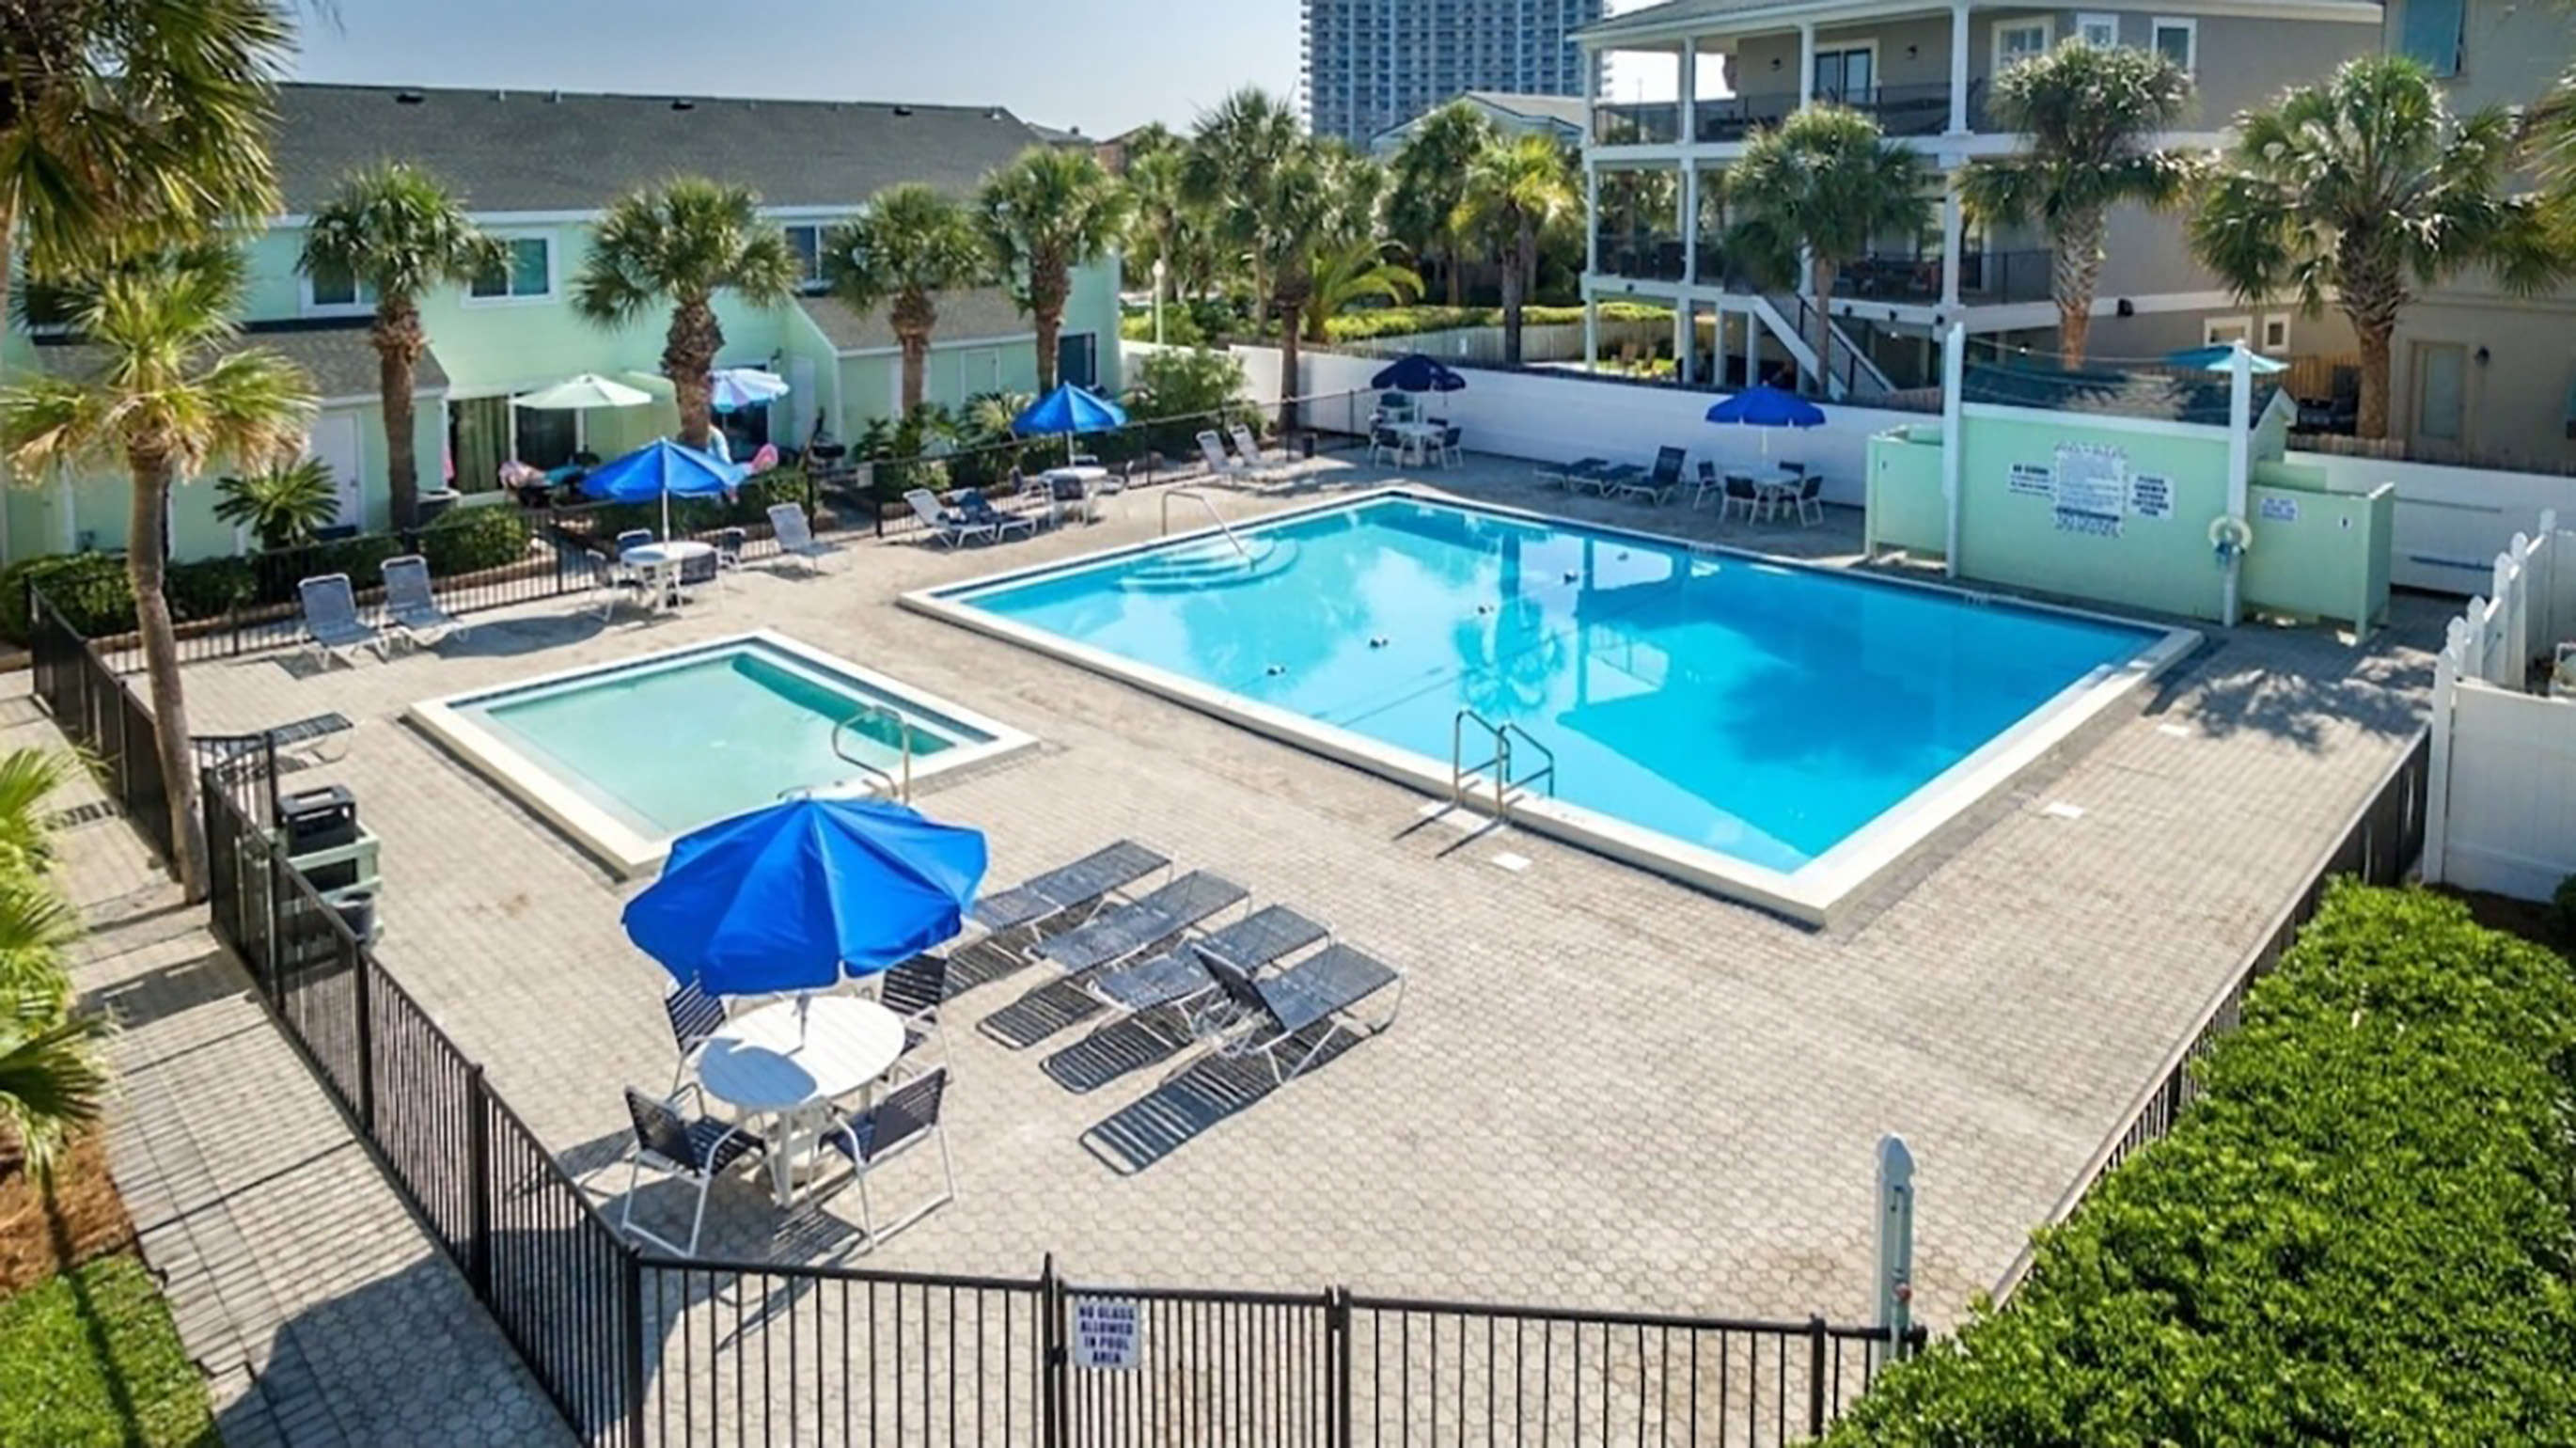 One of two community pools for your family fun!